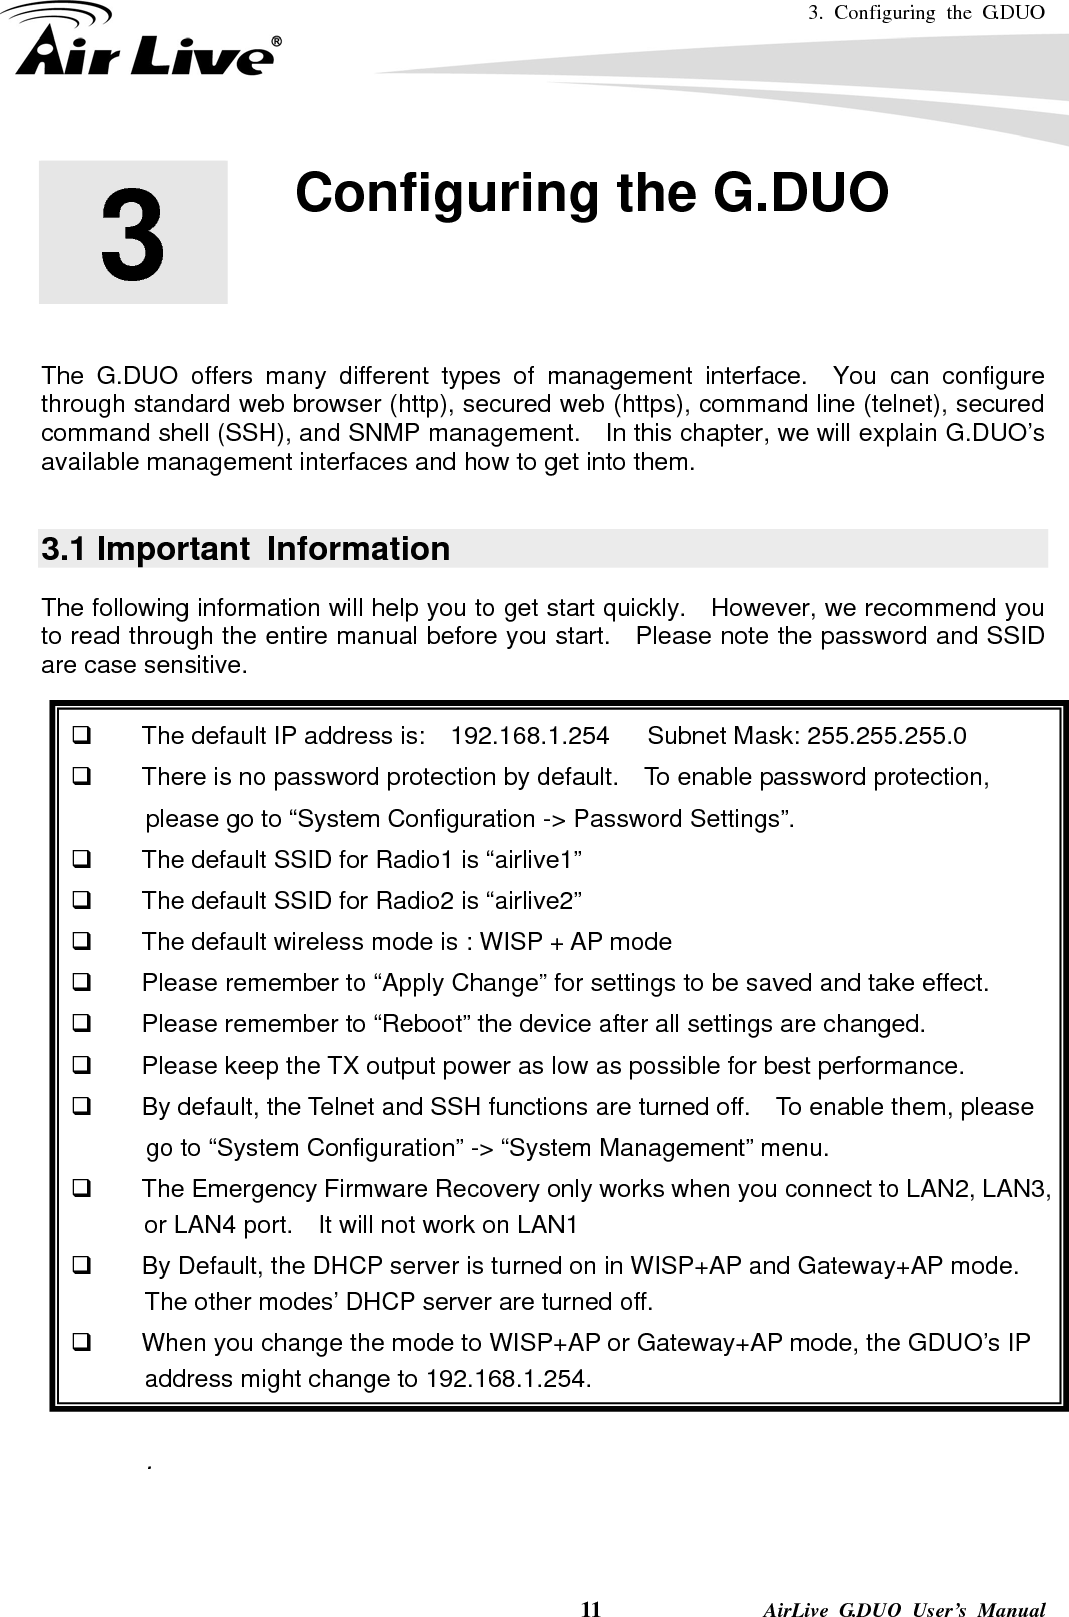 3. Configuring the G.DUO    11              AirLive G.DUO User’s Manual        The G.DUO offers many different types of management interface.  You can configure through standard web browser (http), secured web (https), command line (telnet), secured command shell (SSH), and SNMP management.    In this chapter, we will explain G.DUO’s available management interfaces and how to get into them.      3.1 Important  Information The following information will help you to get start quickly.  However, we recommend you to read through the entire manual before you start.    Please note the password and SSID are case sensitive.        The default IP address is:    192.168.1.254   Subnet Mask: 255.255.255.0   There is no password protection by default.  To enable password protection,              please go to “System Configuration -&gt; Password Settings”.   The default SSID for Radio1 is “airlive1”   The default SSID for Radio2 is “airlive2”   The default wireless mode is : WISP + AP mode   Please remember to “Apply Change” for settings to be saved and take effect.   Please remember to “Reboot” the device after all settings are changed.   Please keep the TX output power as low as possible for best performance.   By default, the Telnet and SSH functions are turned off.    To enable them, please       go to “System Configuration” -&gt; “System Management” menu.   The Emergency Firmware Recovery only works when you connect to LAN2, LAN3, or LAN4 port.    It will not work on LAN1   By Default, the DHCP server is turned on in WISP+AP and Gateway+AP mode.   The other modes’ DHCP server are turned off.   When you change the mode to WISP+AP or Gateway+AP mode, the GDUO’s IP address might change to 192.168.1.254.  .  3  3. Configuring the G.DUO  